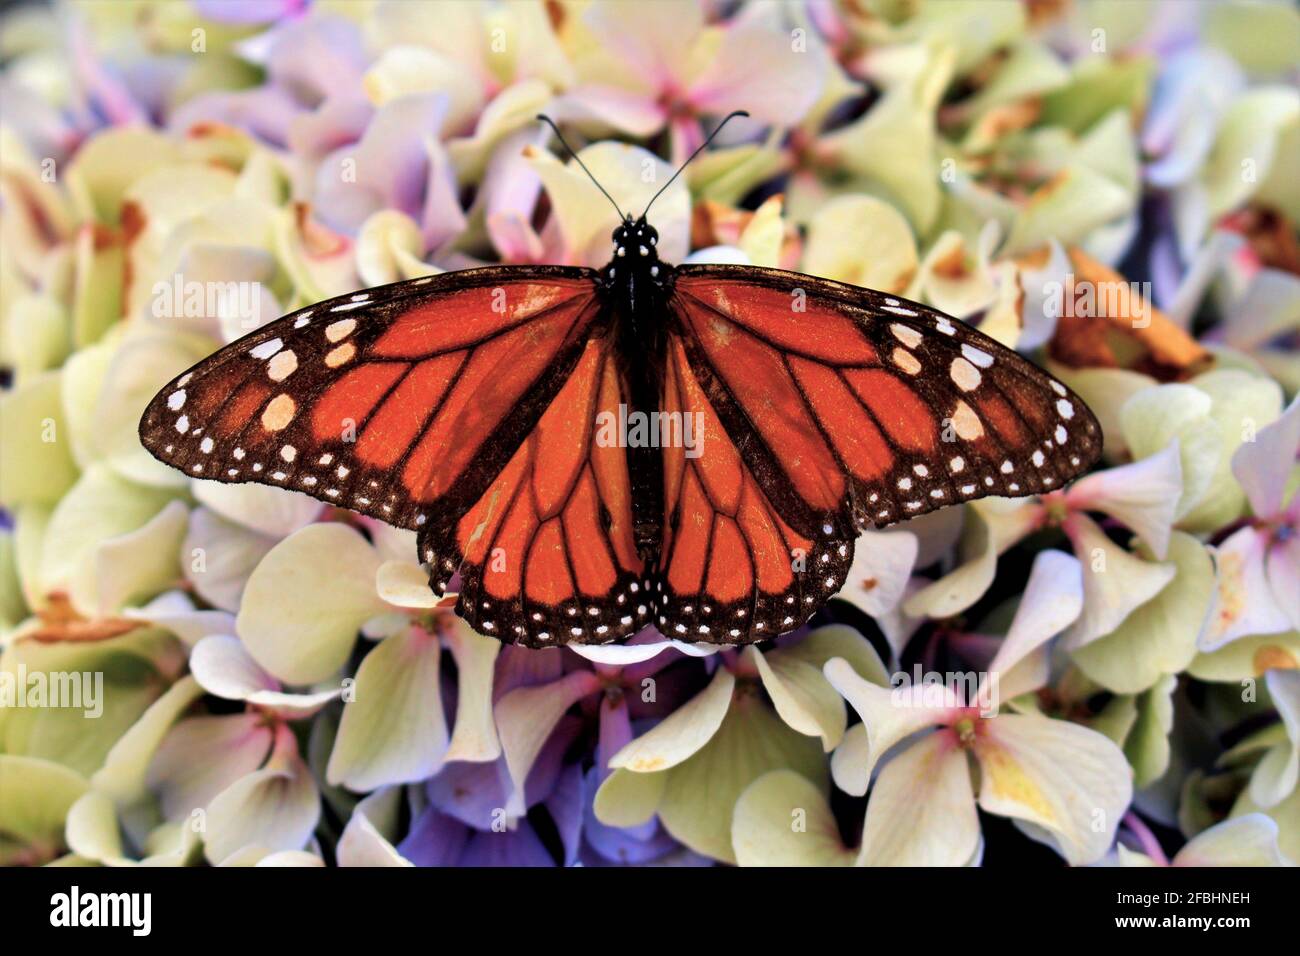 An old Monarch butterfly Stock Photo